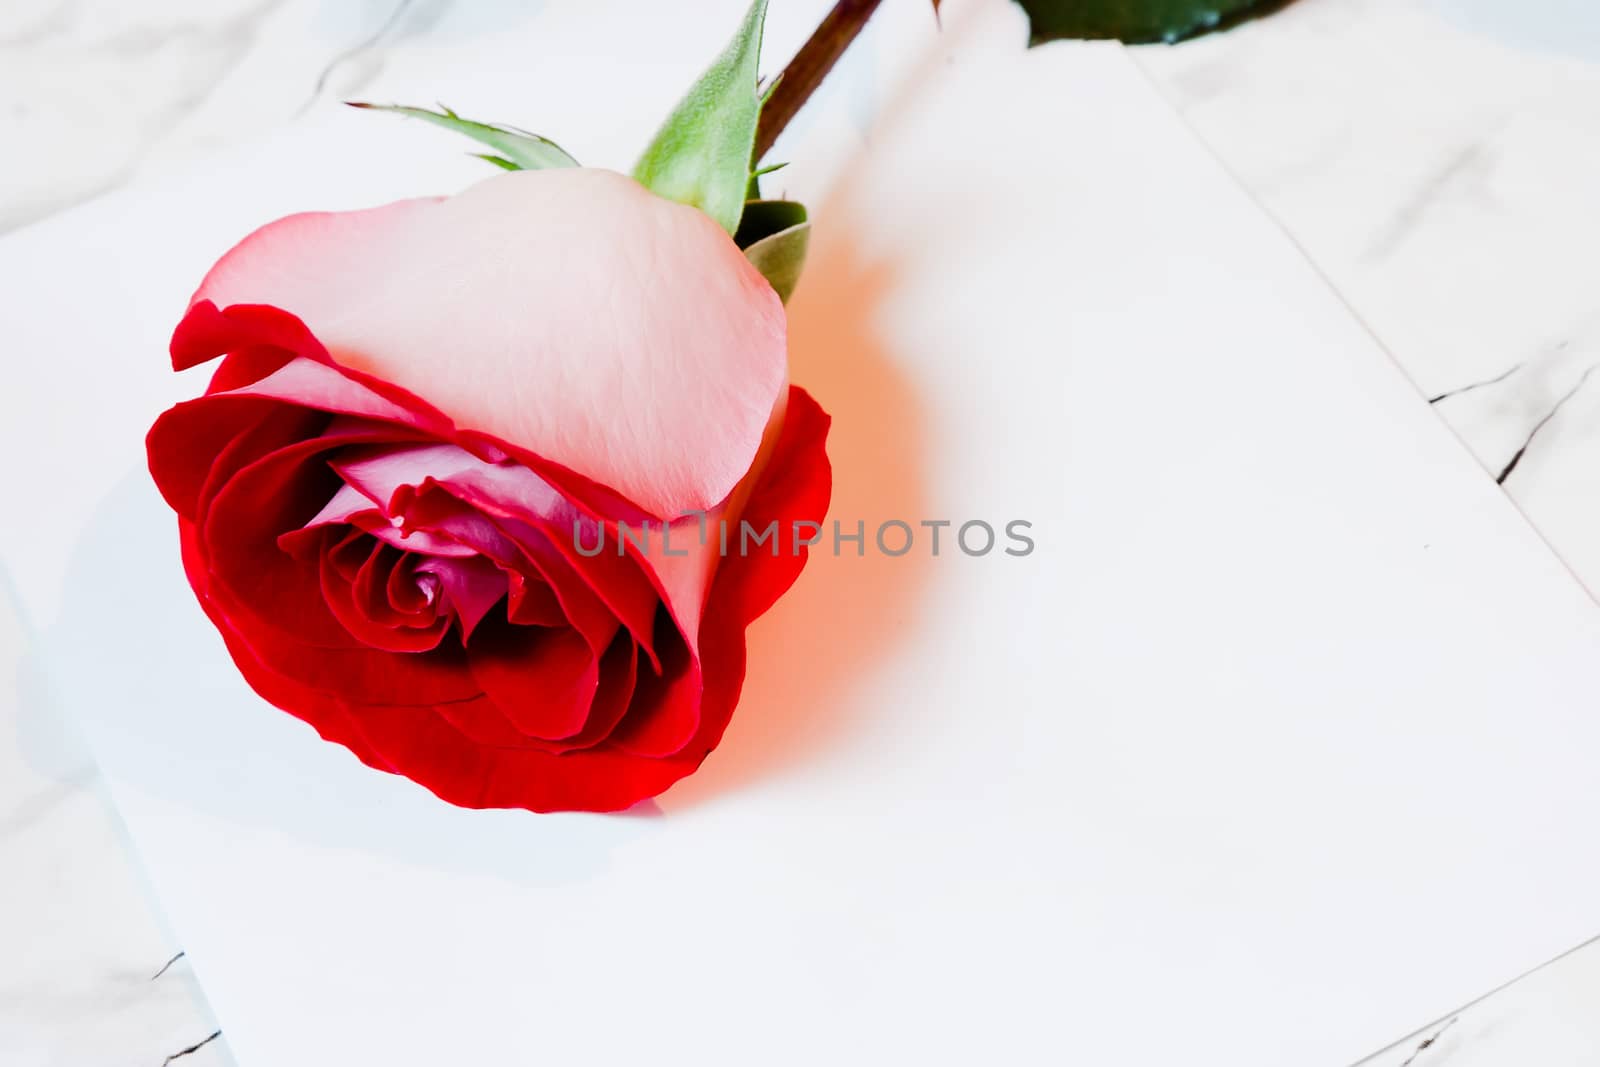 Red rose and a sheet of paper by pzRomashka